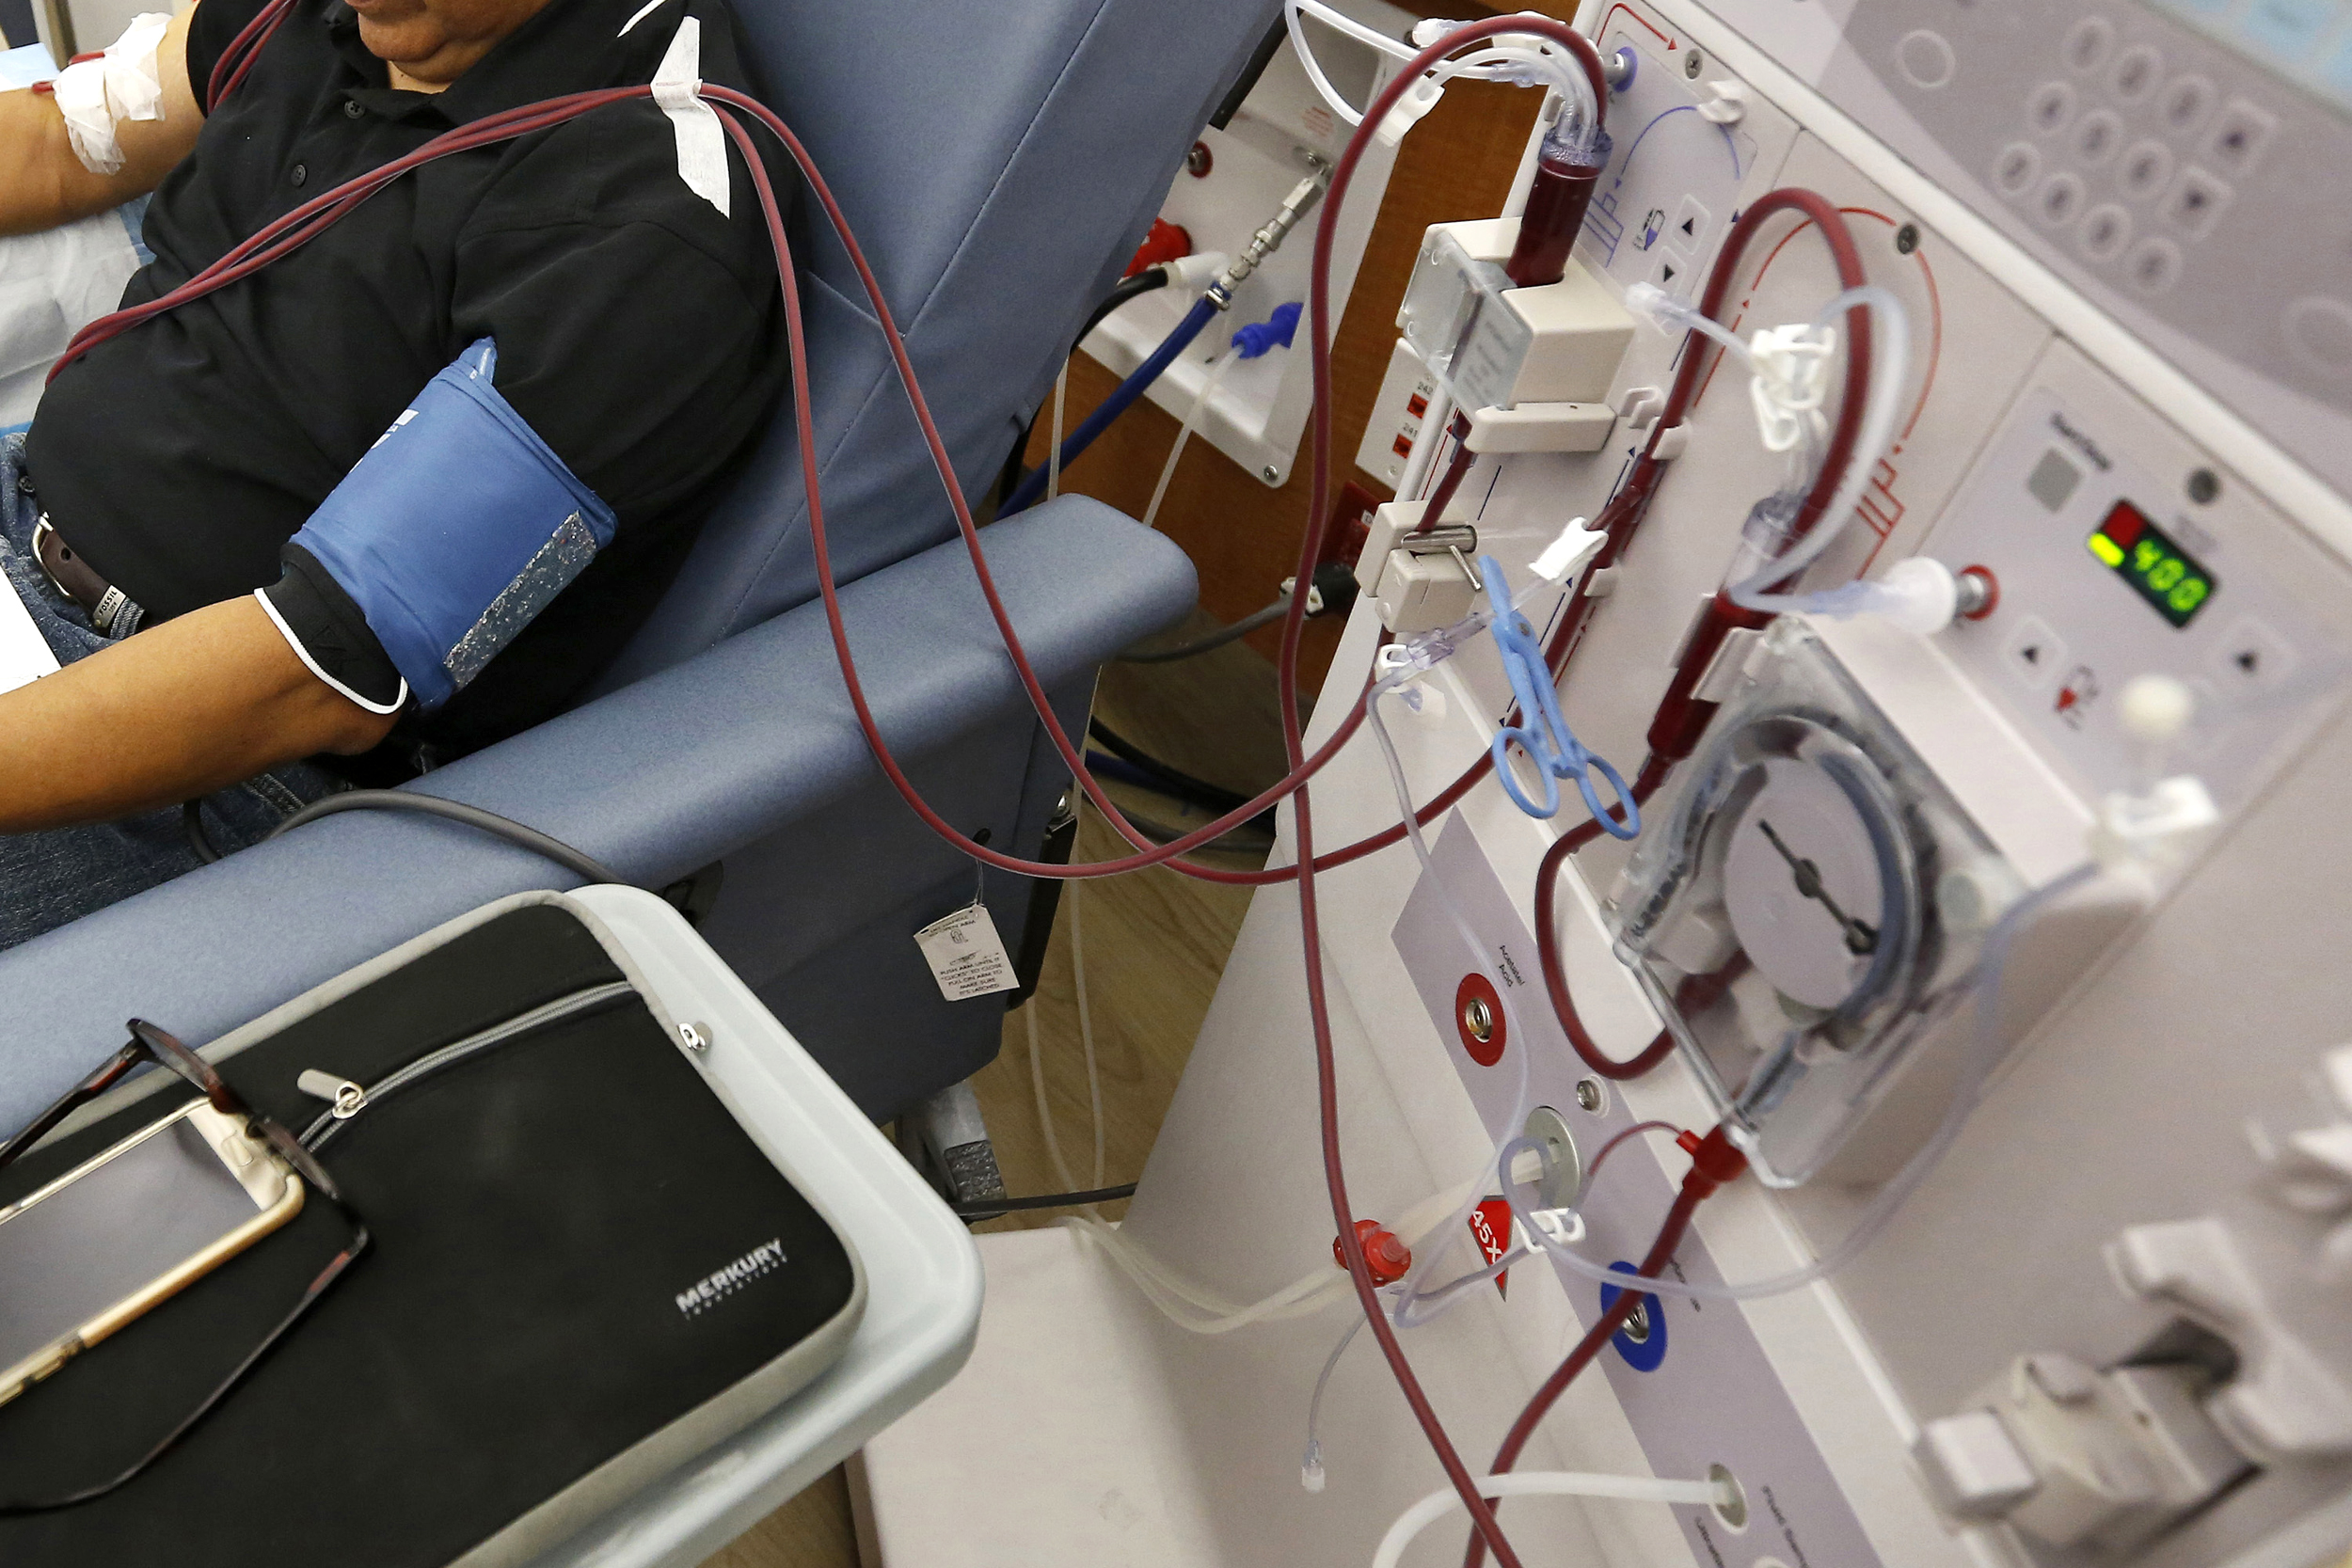 FILE - In this Monday, Sept. 24, 2018 file photo, a patient undergoes dialysis at a clinic in Sacramento, Calif. Results of a study released on Sunday, April 14, 2019 show that the diabetes drug Invokana has been shown to help prevent or delay worsening of kidney disease, which causes millions of deaths each year and requires hundreds of thousands of people to use dialysis to stay alive. (AP Photo/Rich Pedroncelli)